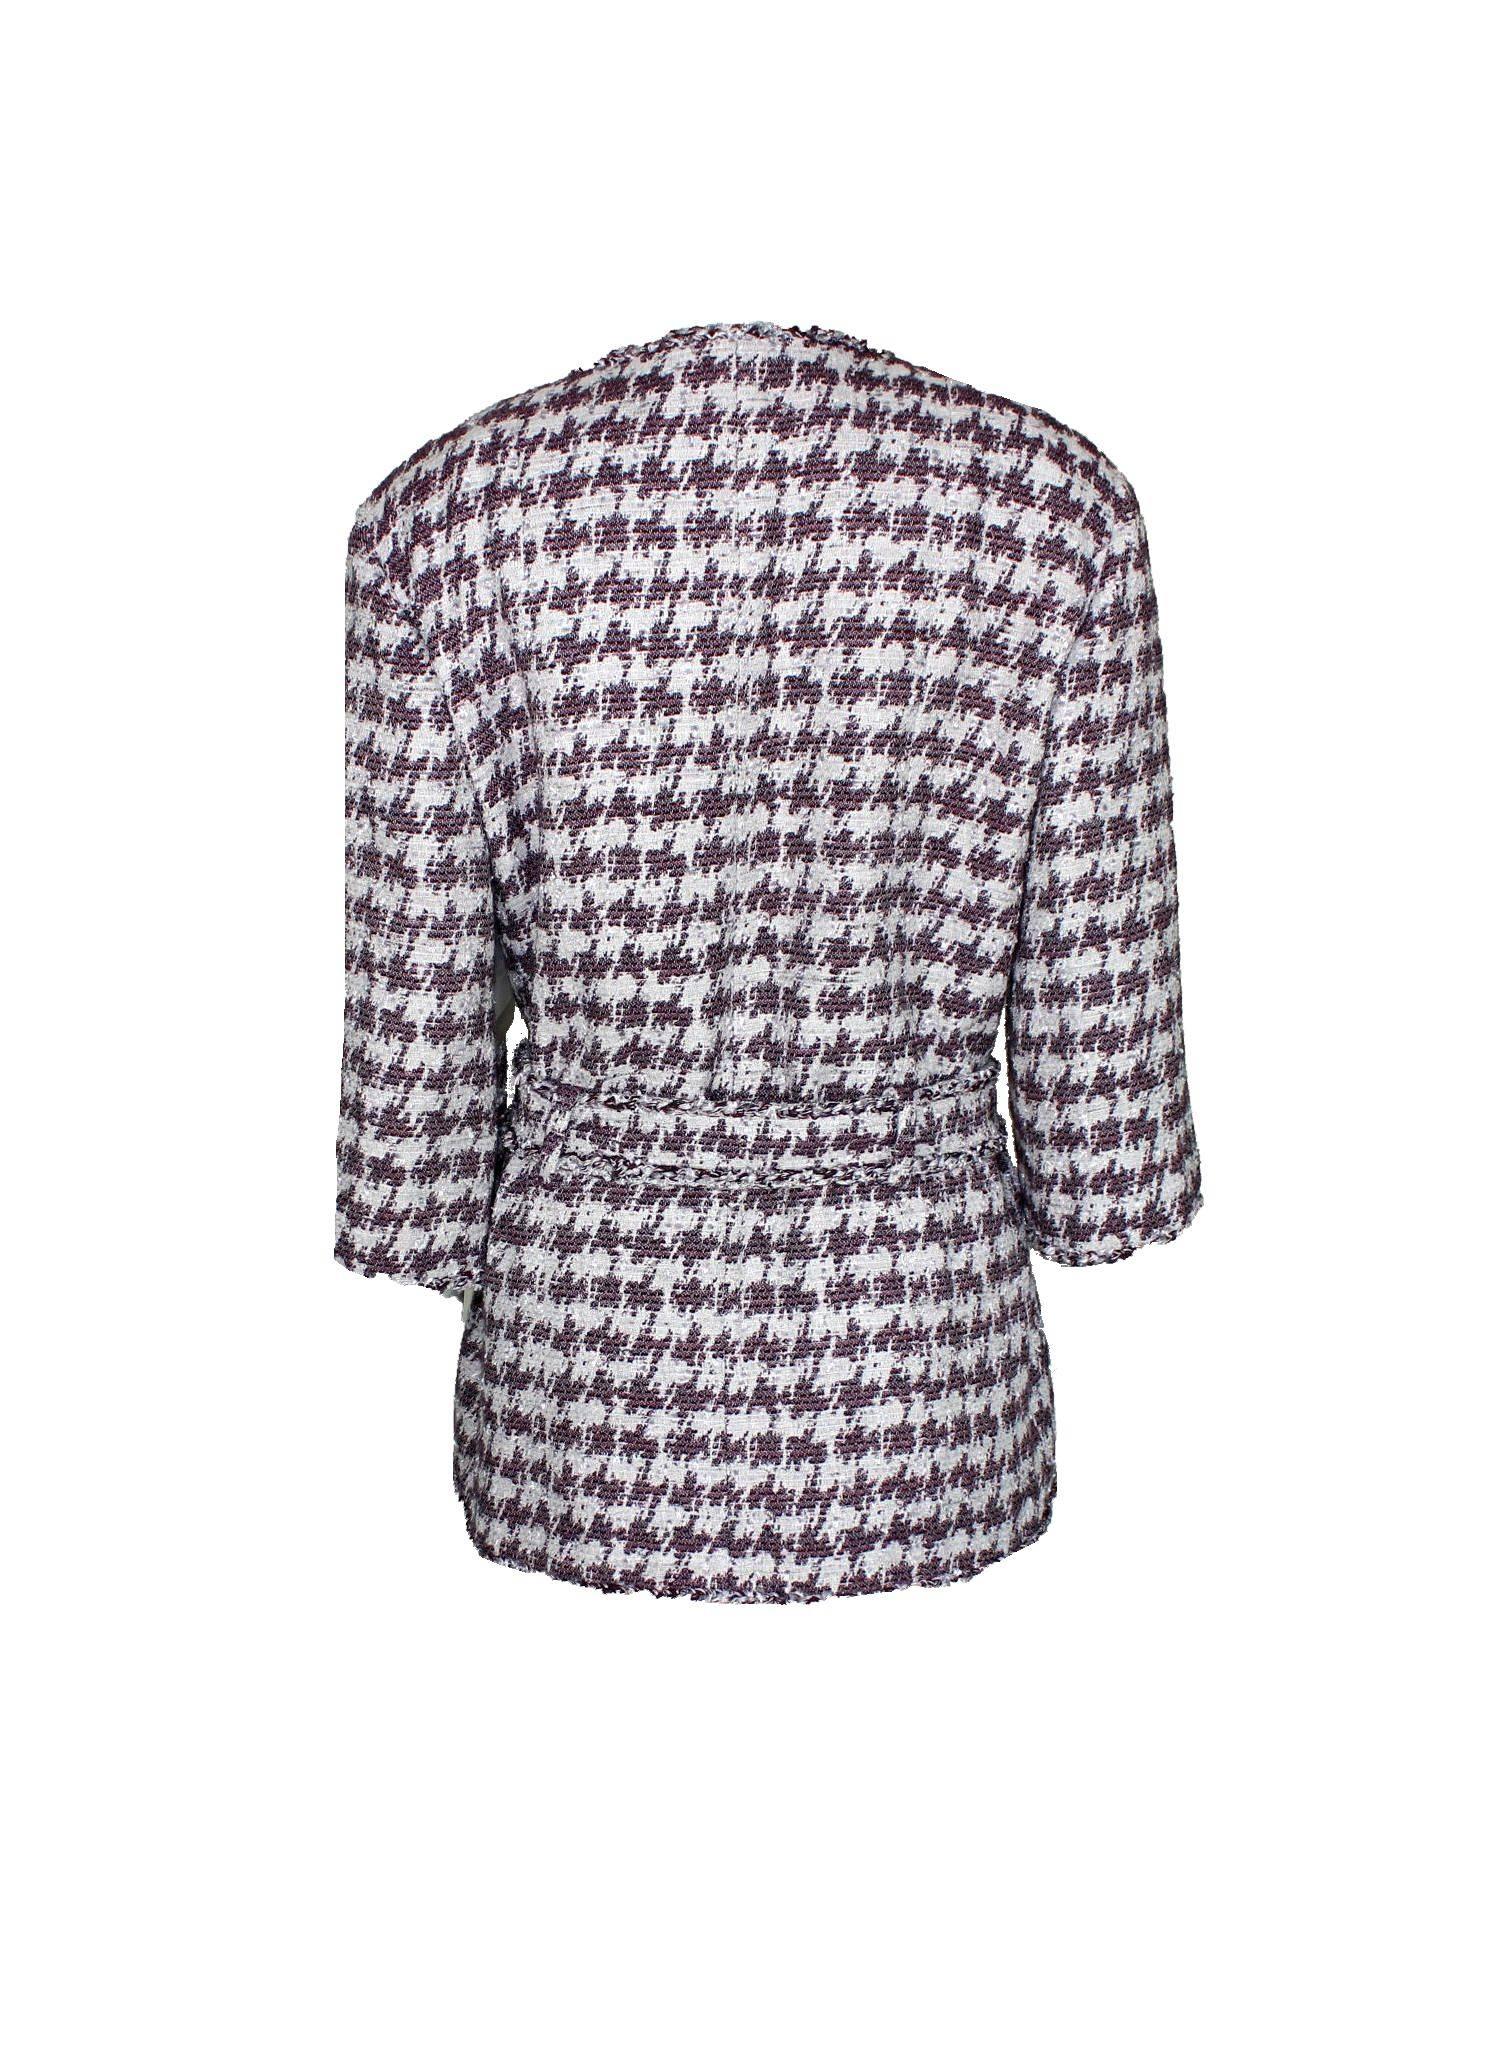 
Beautiful CHANEL tweed jacket / short coat designed by Karl Lagerfeld
A true CHANEL item in the famous houndstooth pattern that will last you many years
CHANEL's signature fringed fantasy tweed fabric produced by Maison Lesage
A true